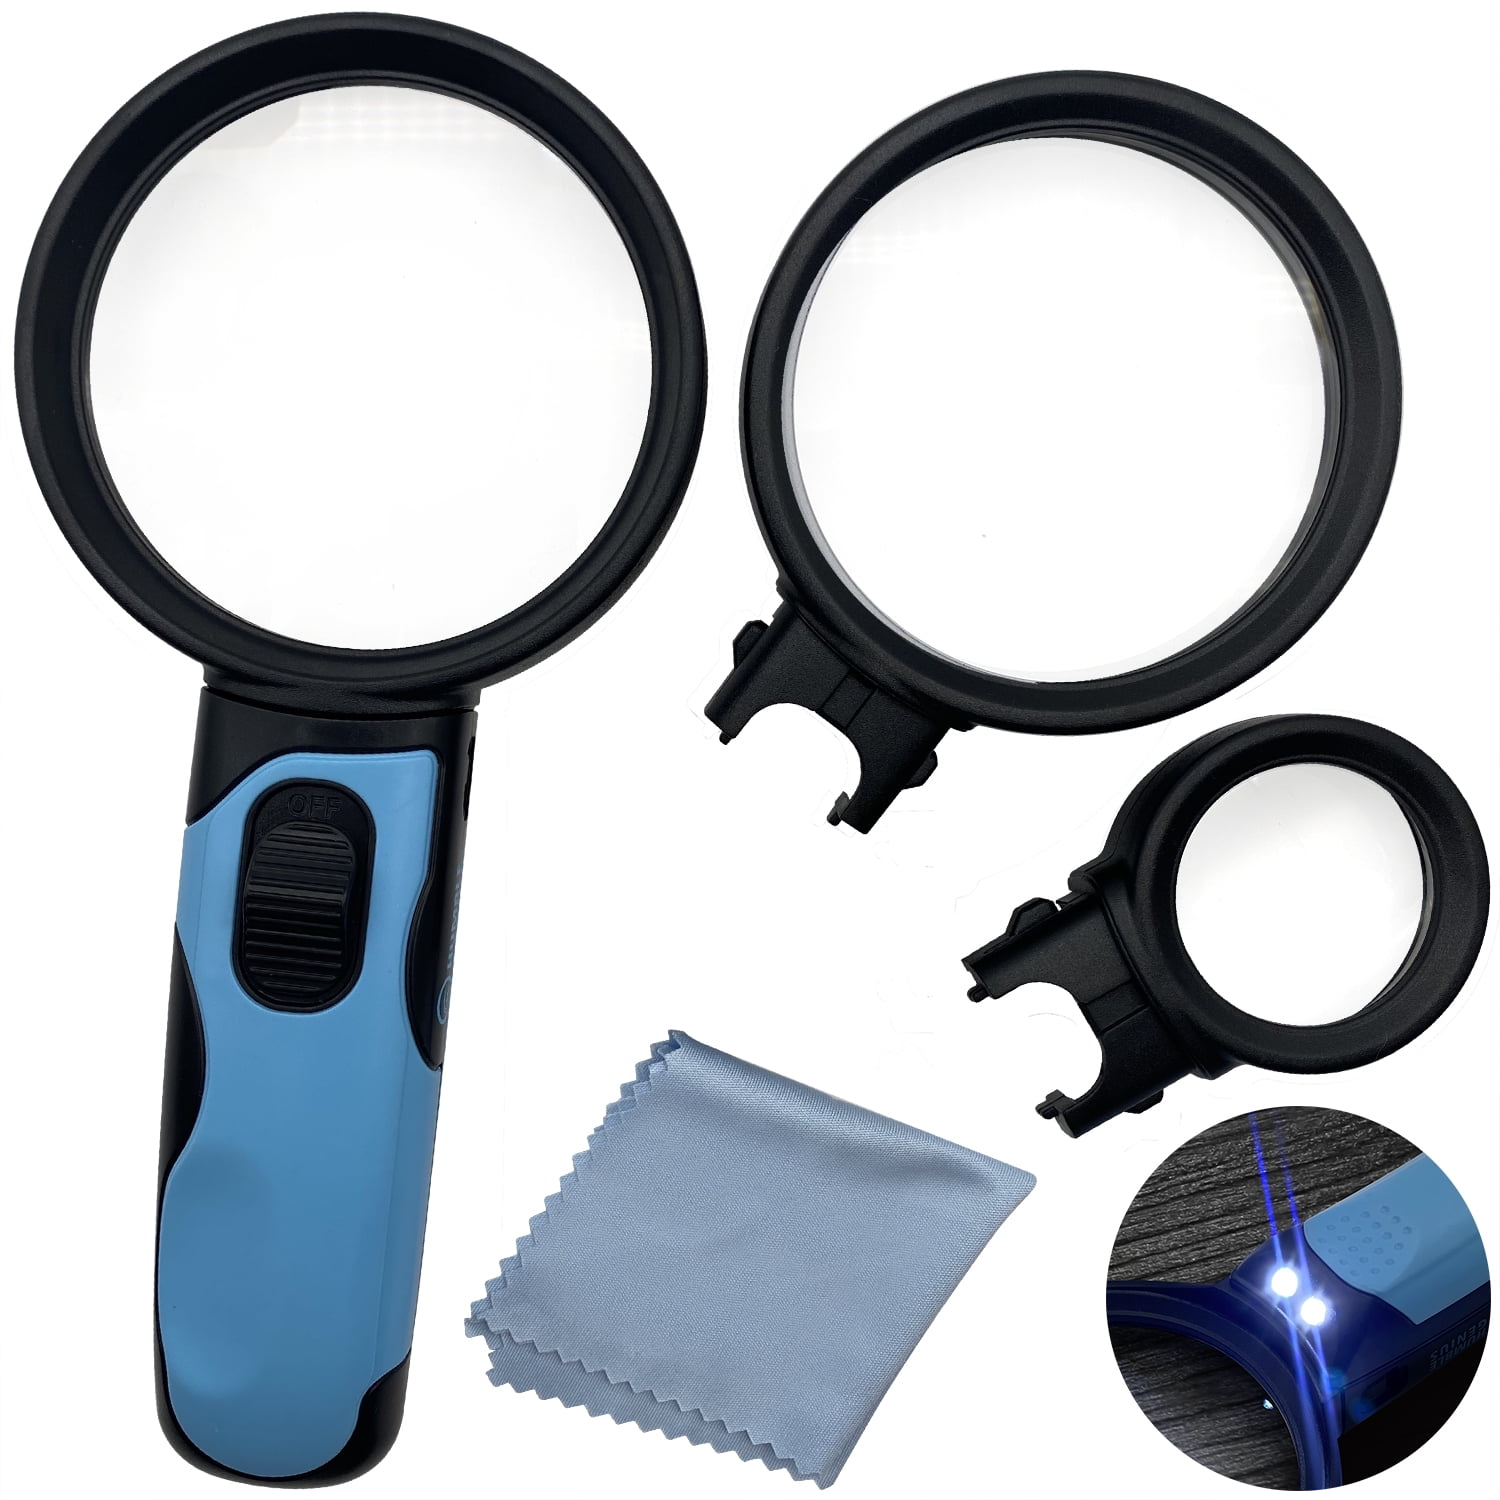 2.25x/5x Hands Free Lighted Dual Use Neck-held Round Magnifier